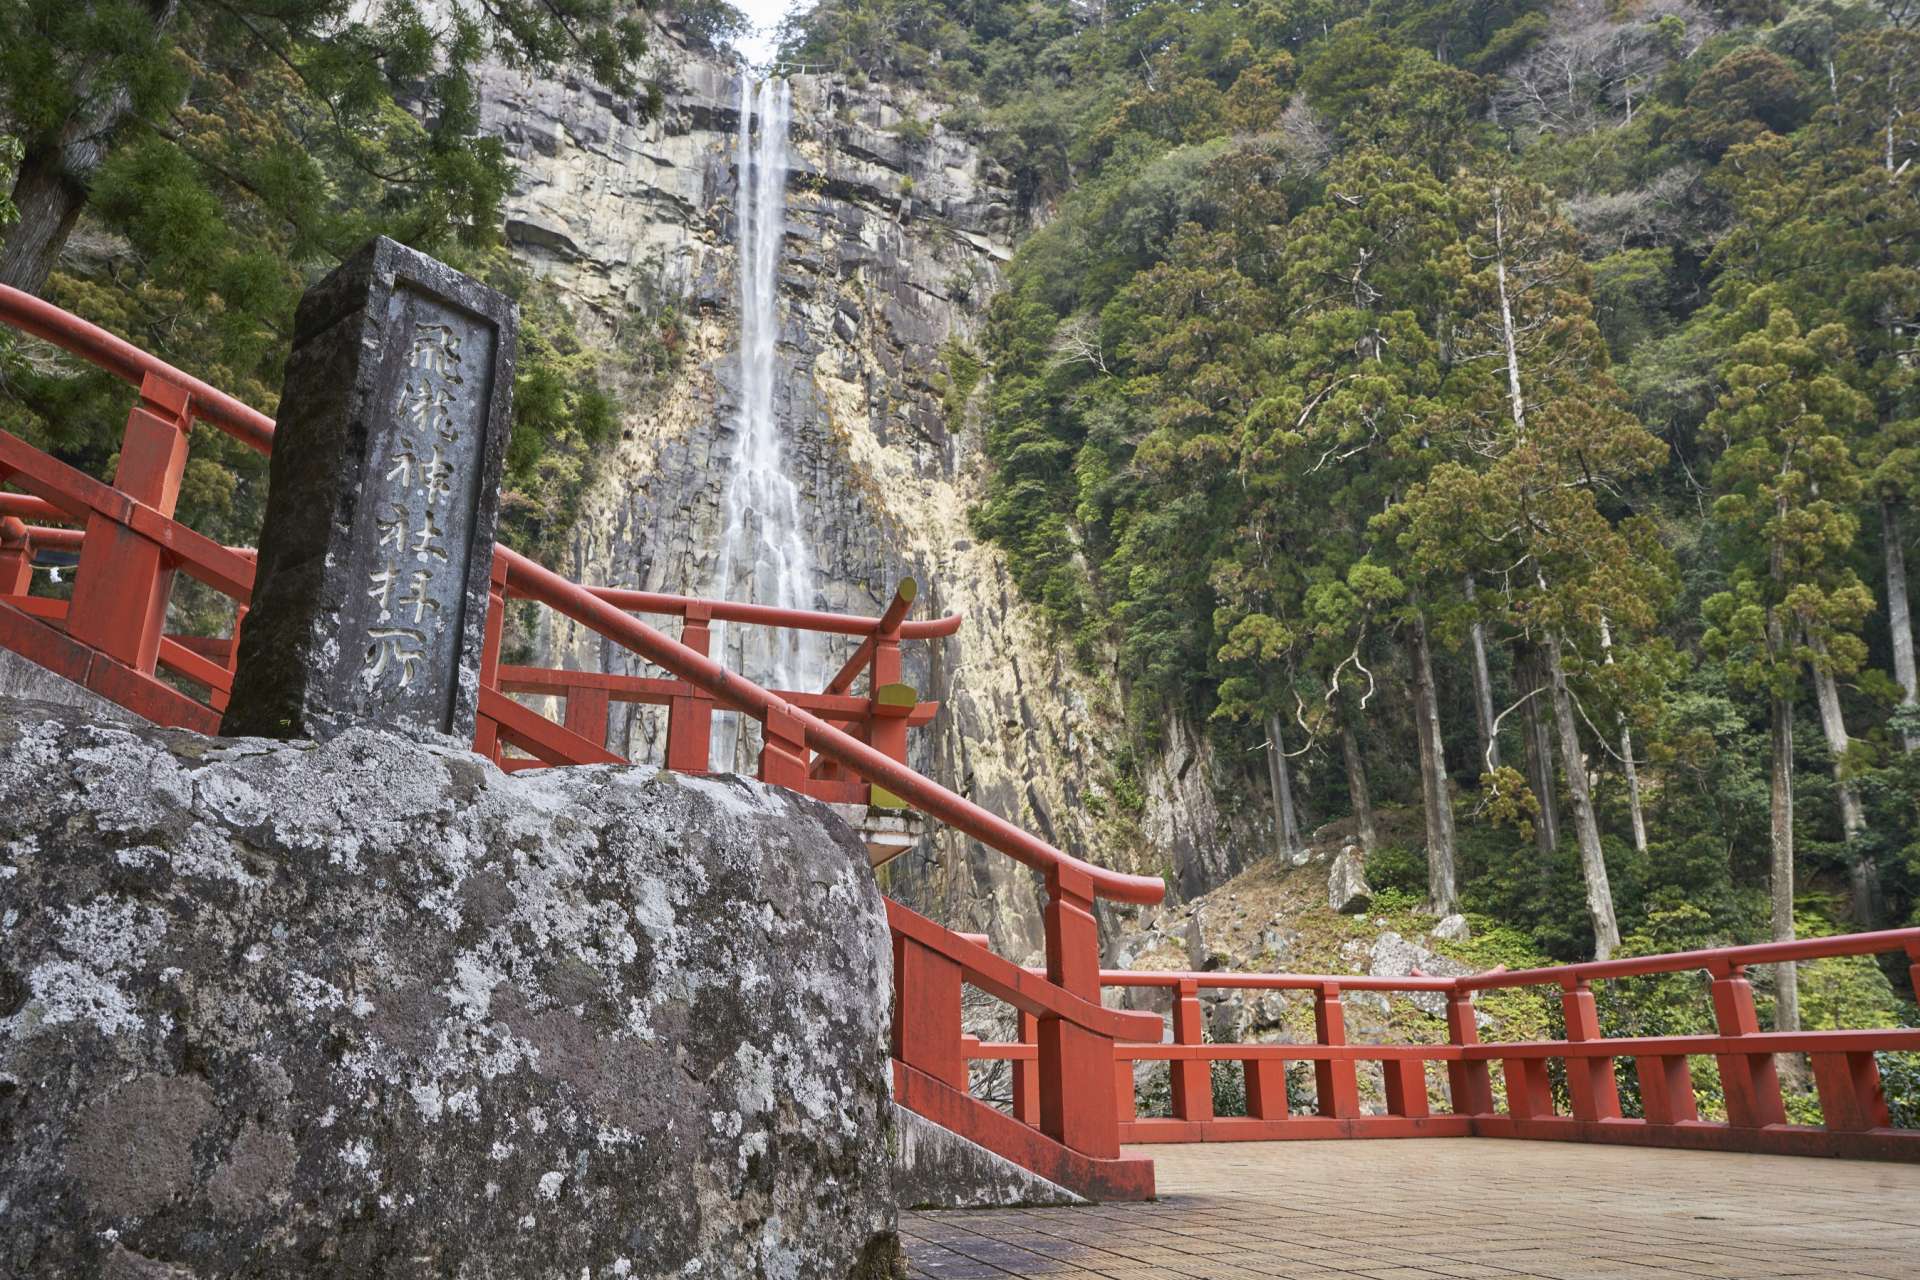 The falls can be worshipped at close proximity from a platform at the rear of the shrine grounds.